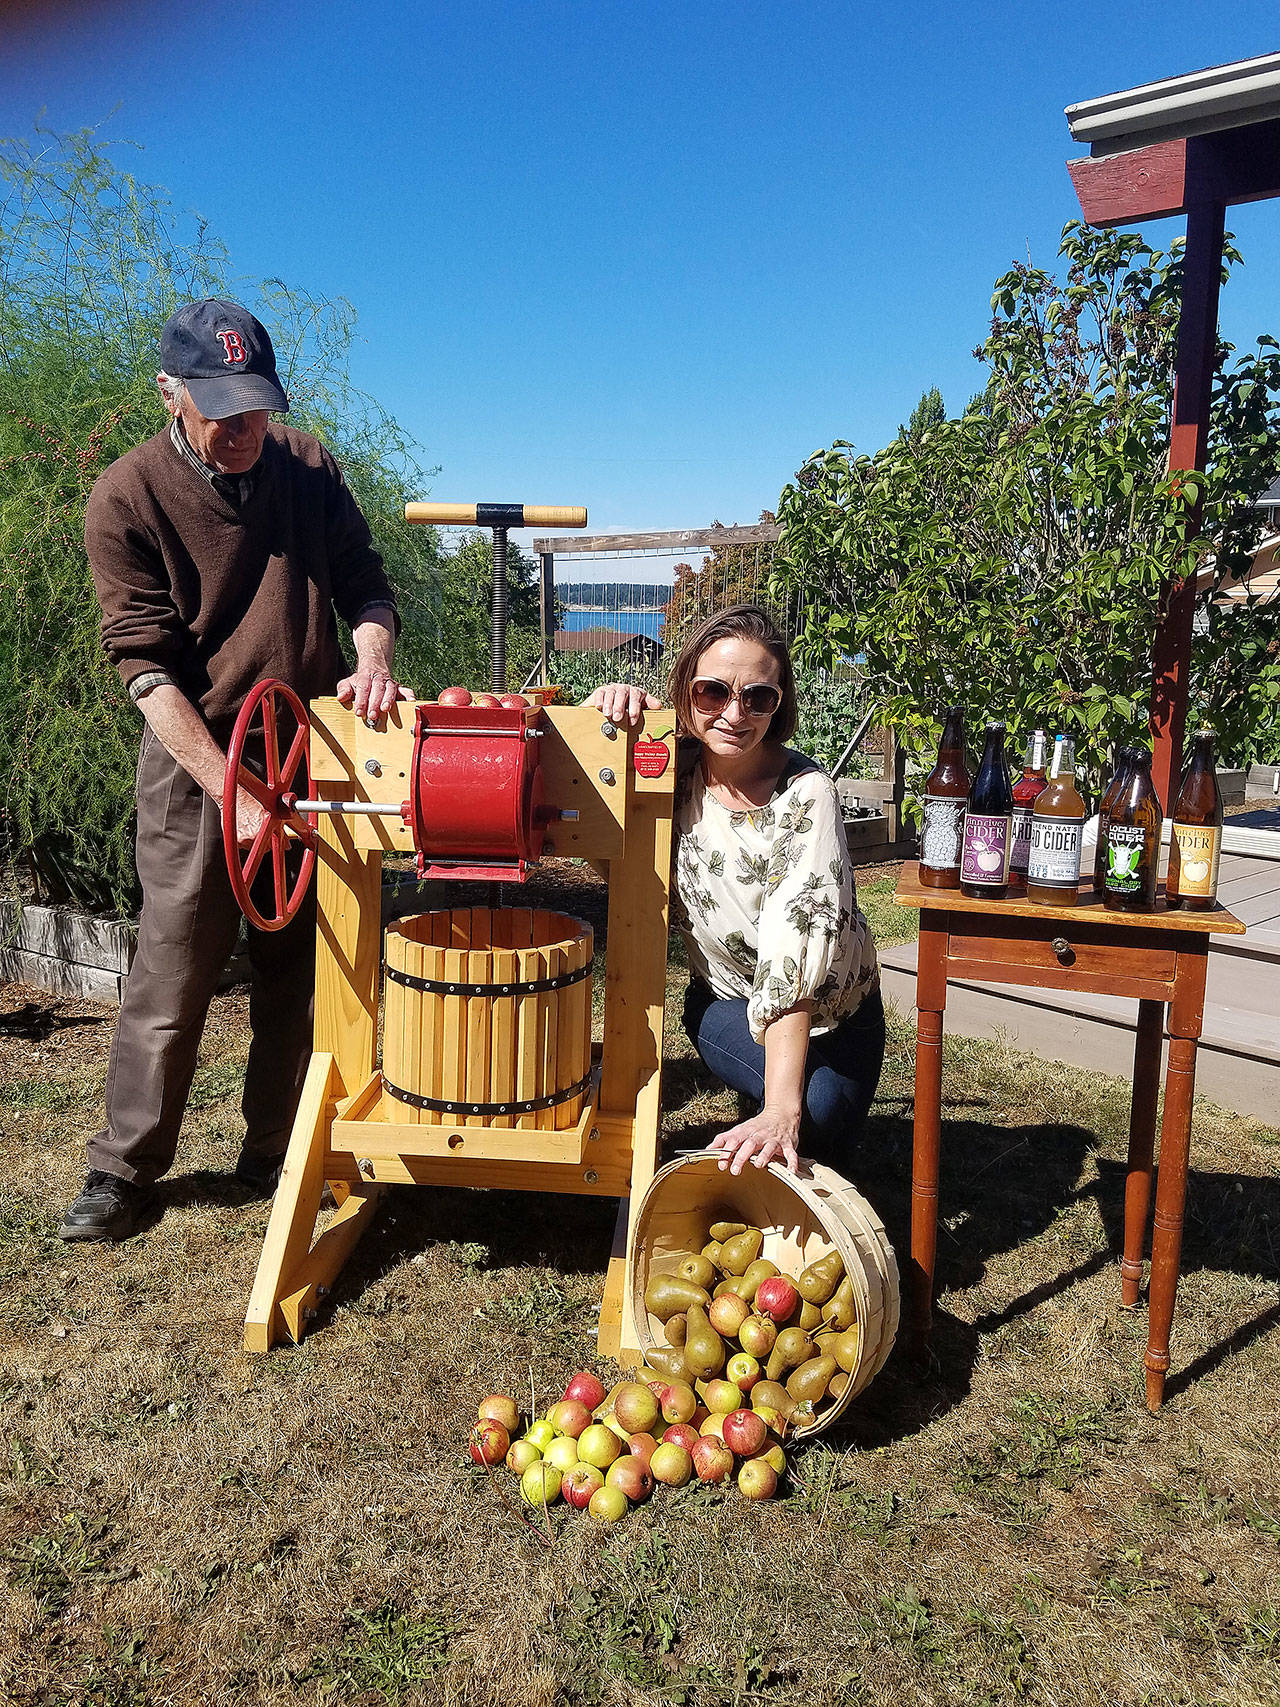 Coupeville resident Jay Adams will be loaning his vintage apple press to next Saturday’s Cider Festival at Pacific Rim Institute. Mosa Neis with PRI shows off the bushels of apples and variety of cider available for tasting. Photo by Patricia Guthrie/Whidbey News-Times.